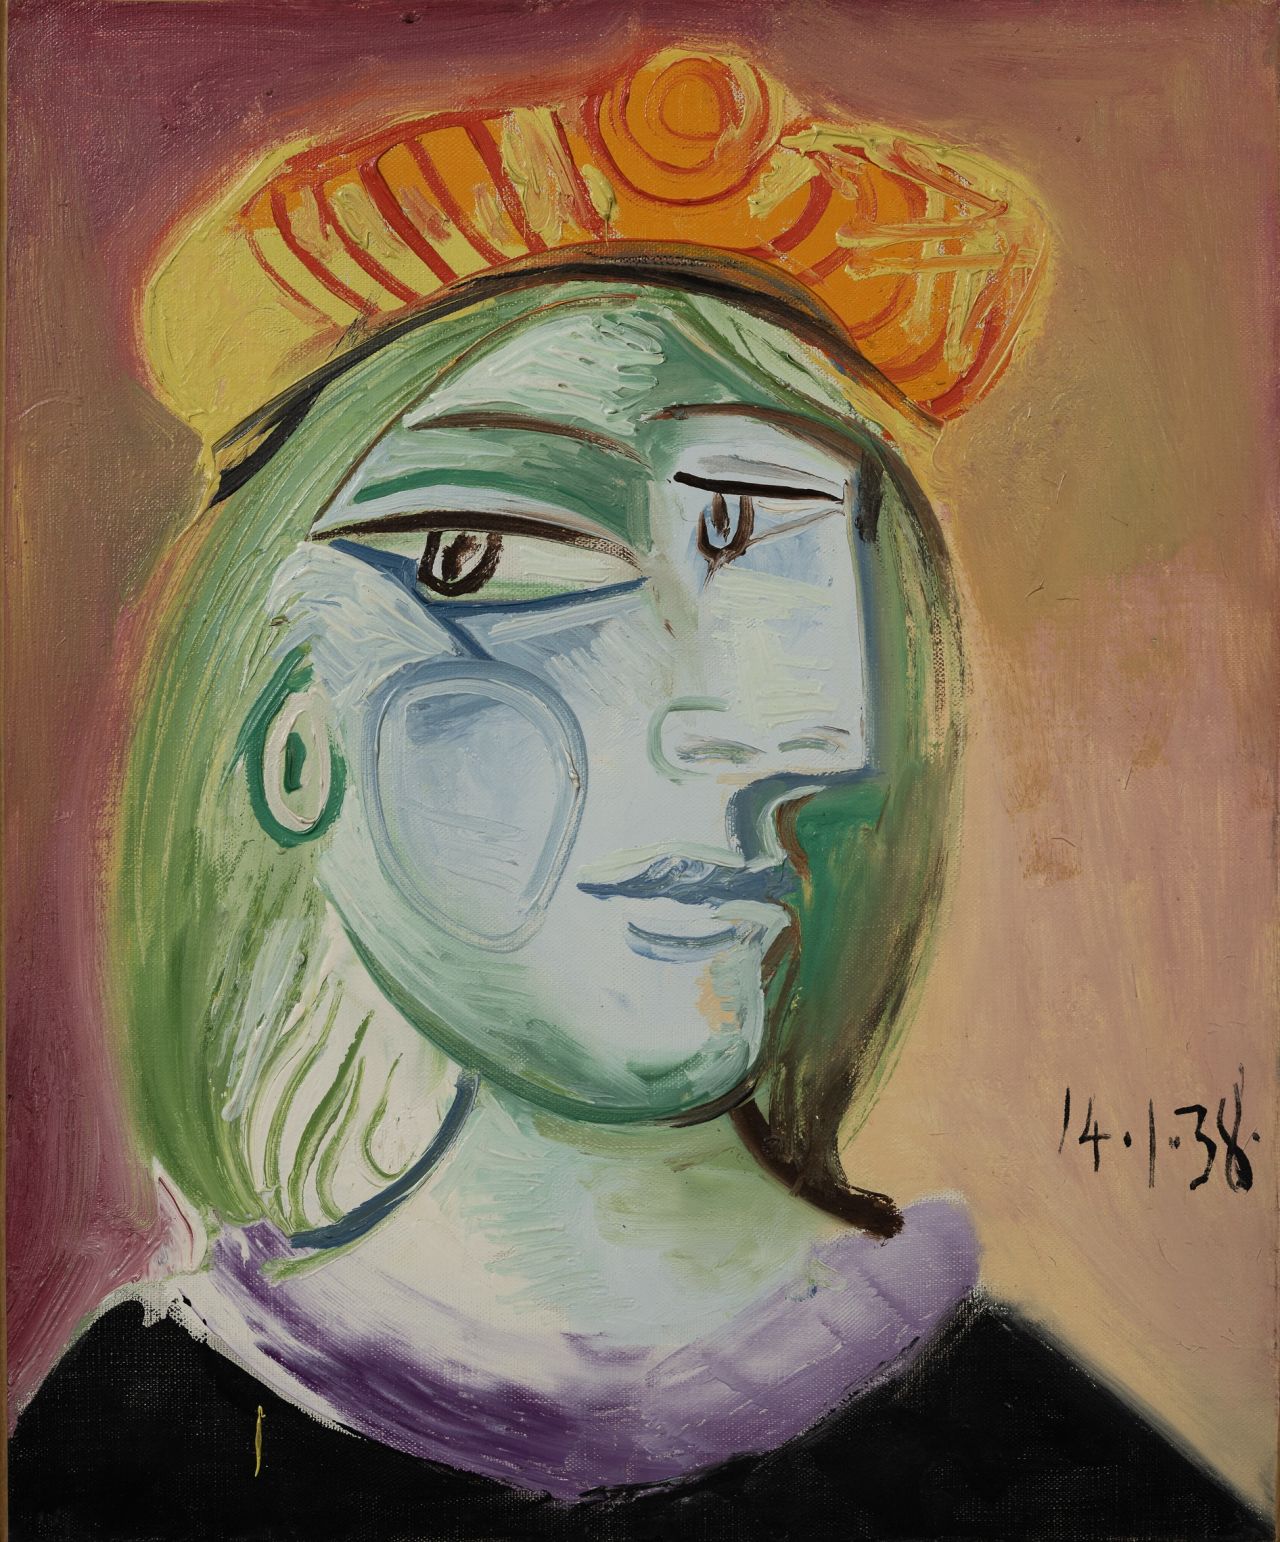 Picasso's "Femme au béret rouge-orange" depicts the model Marie-Thérèse Walter. They began an affair in the late 1920s and had a child together.